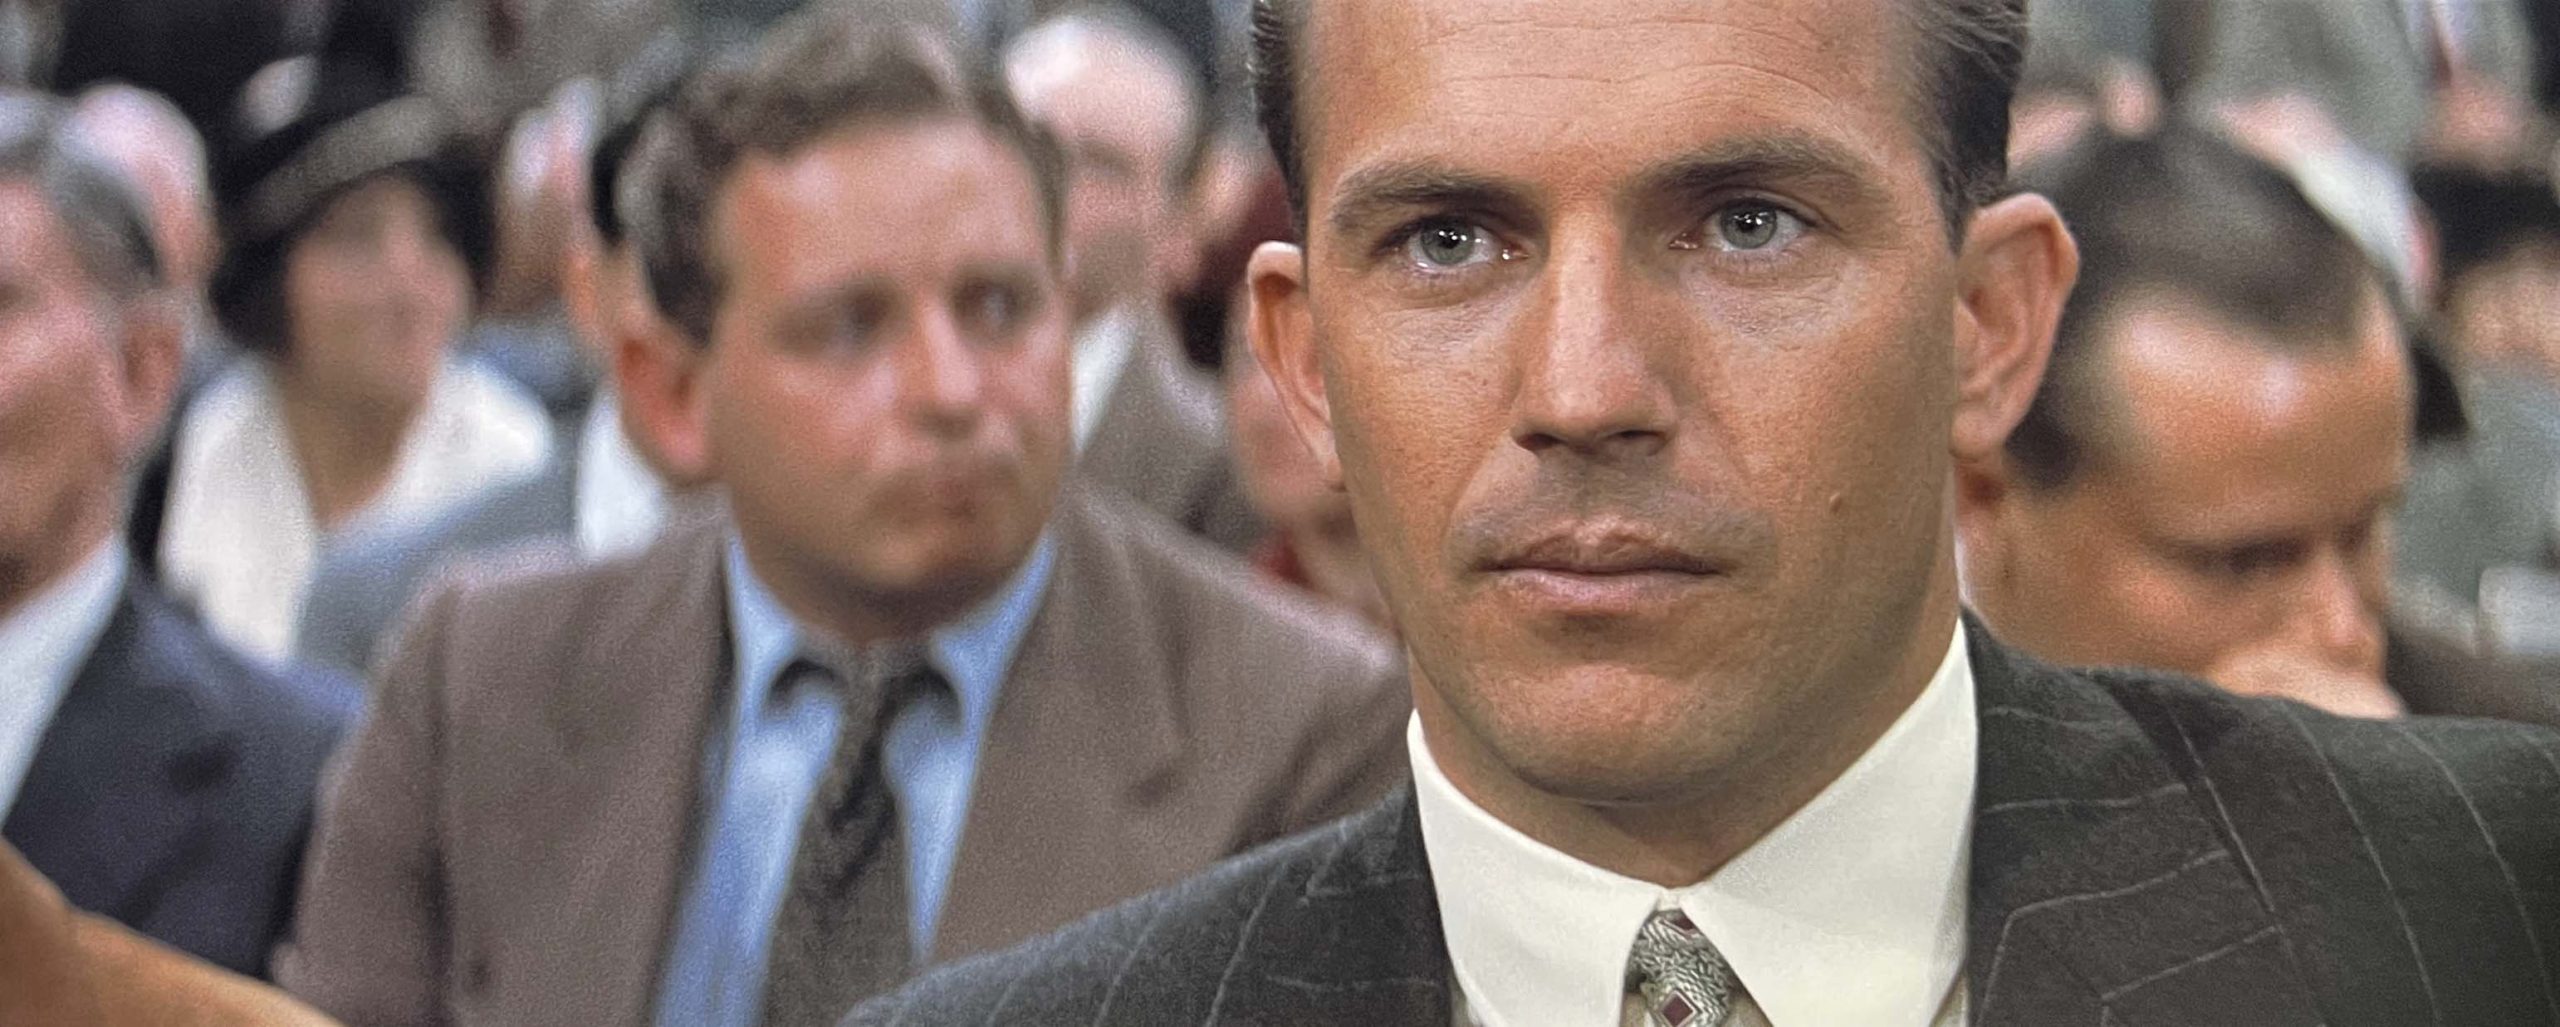 the untouchables eliot ness kevin costner 1